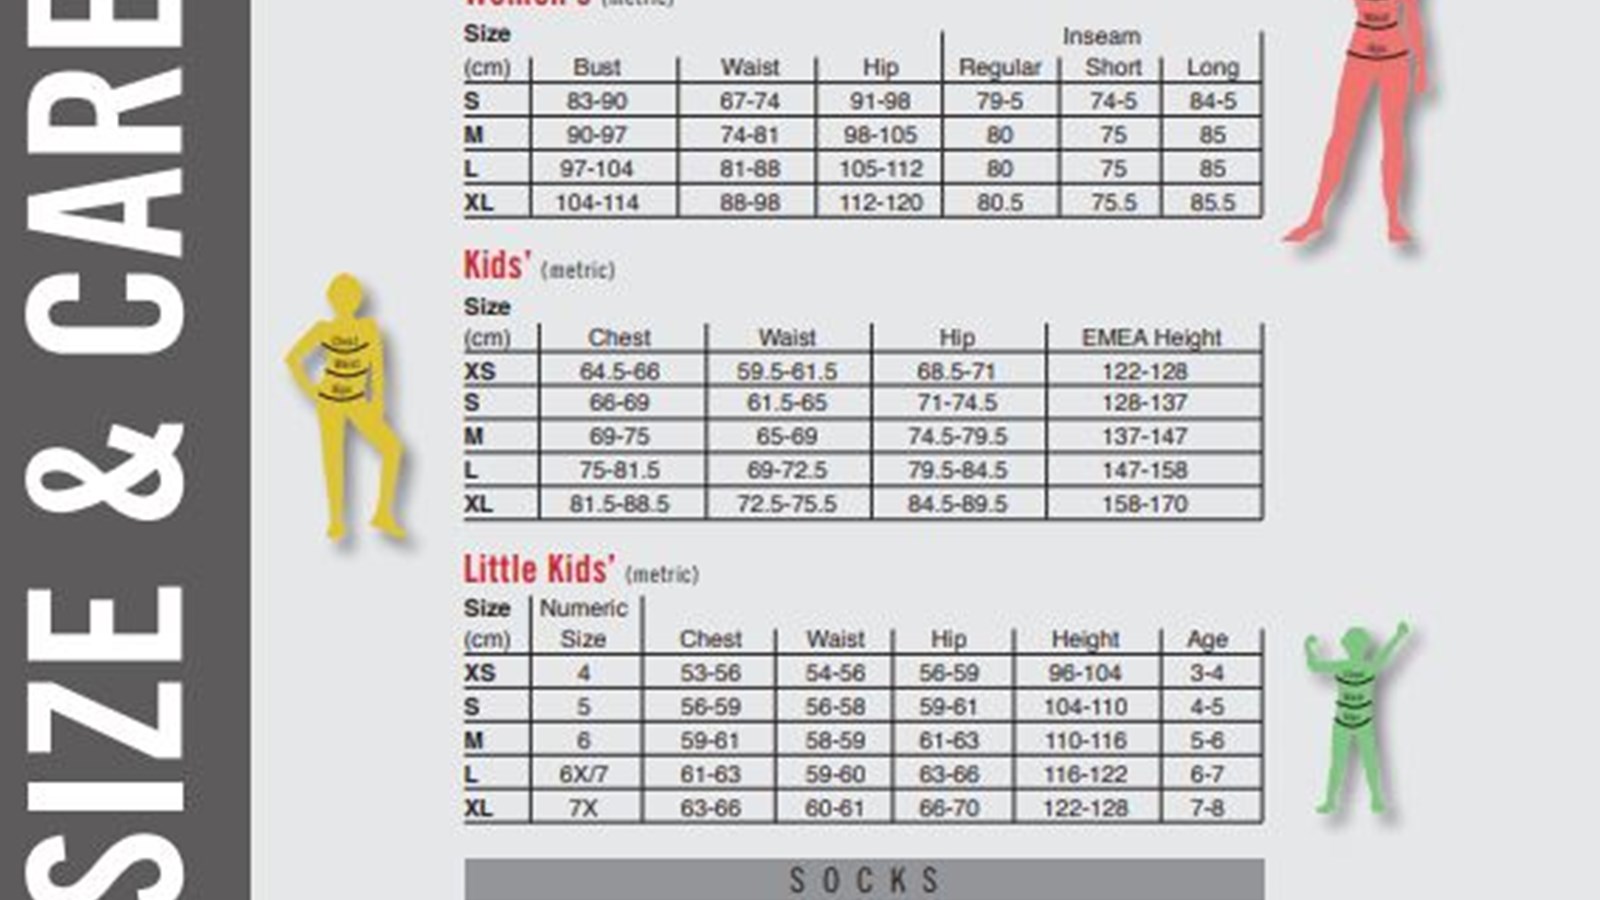 Apparel and Clothing sizing chart provided by Nike